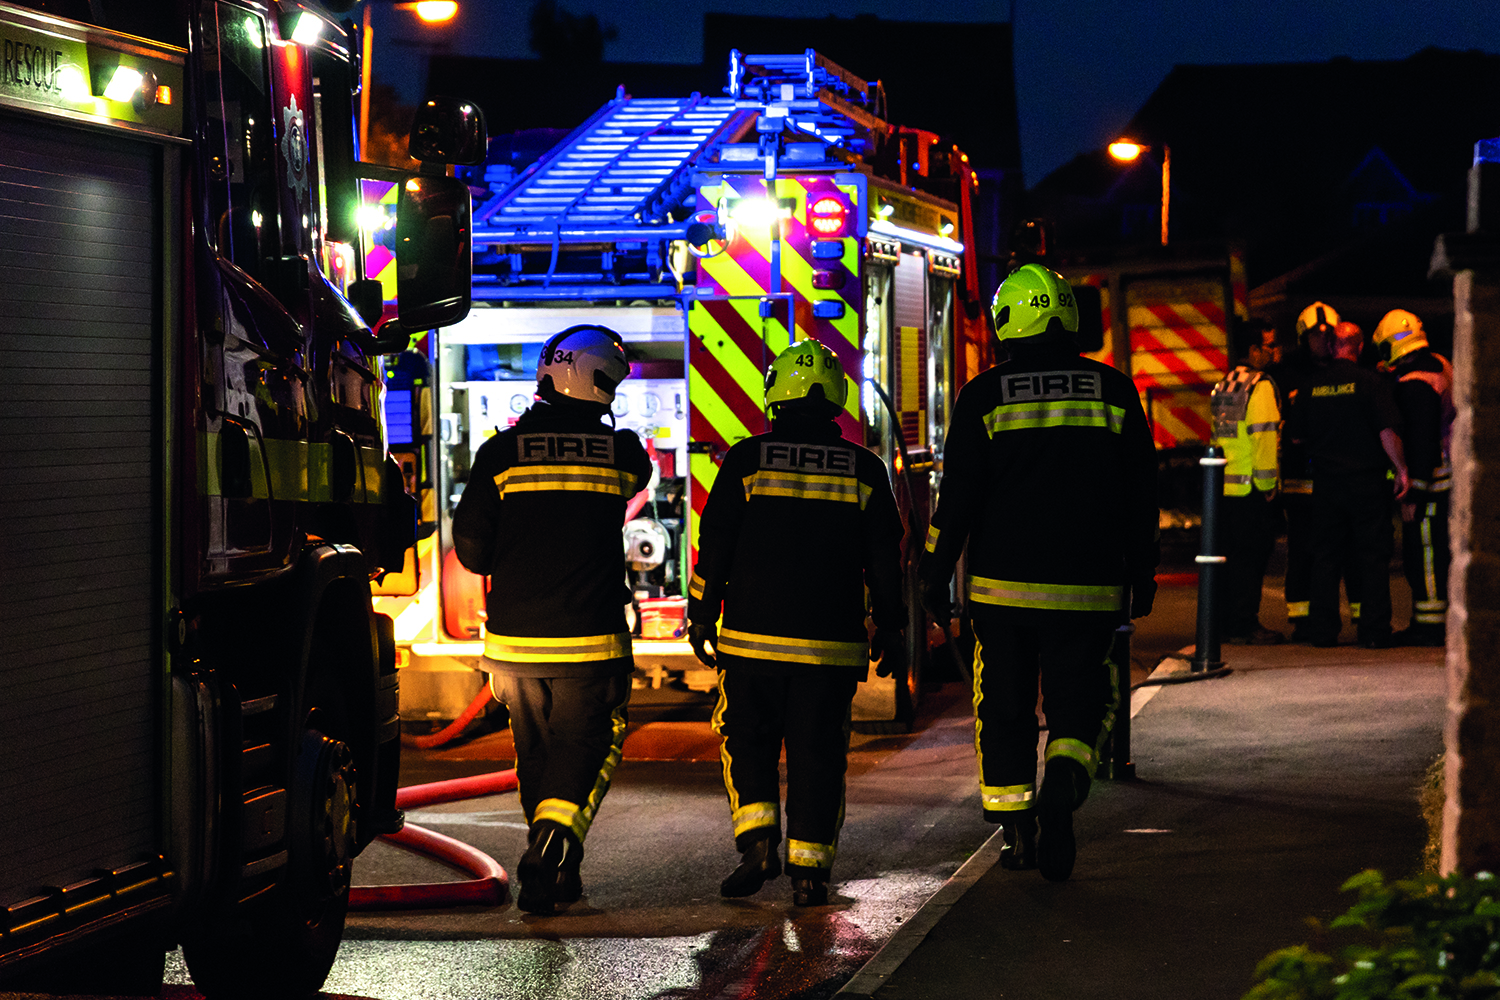 Three firefighters walking towards a fire engine at night